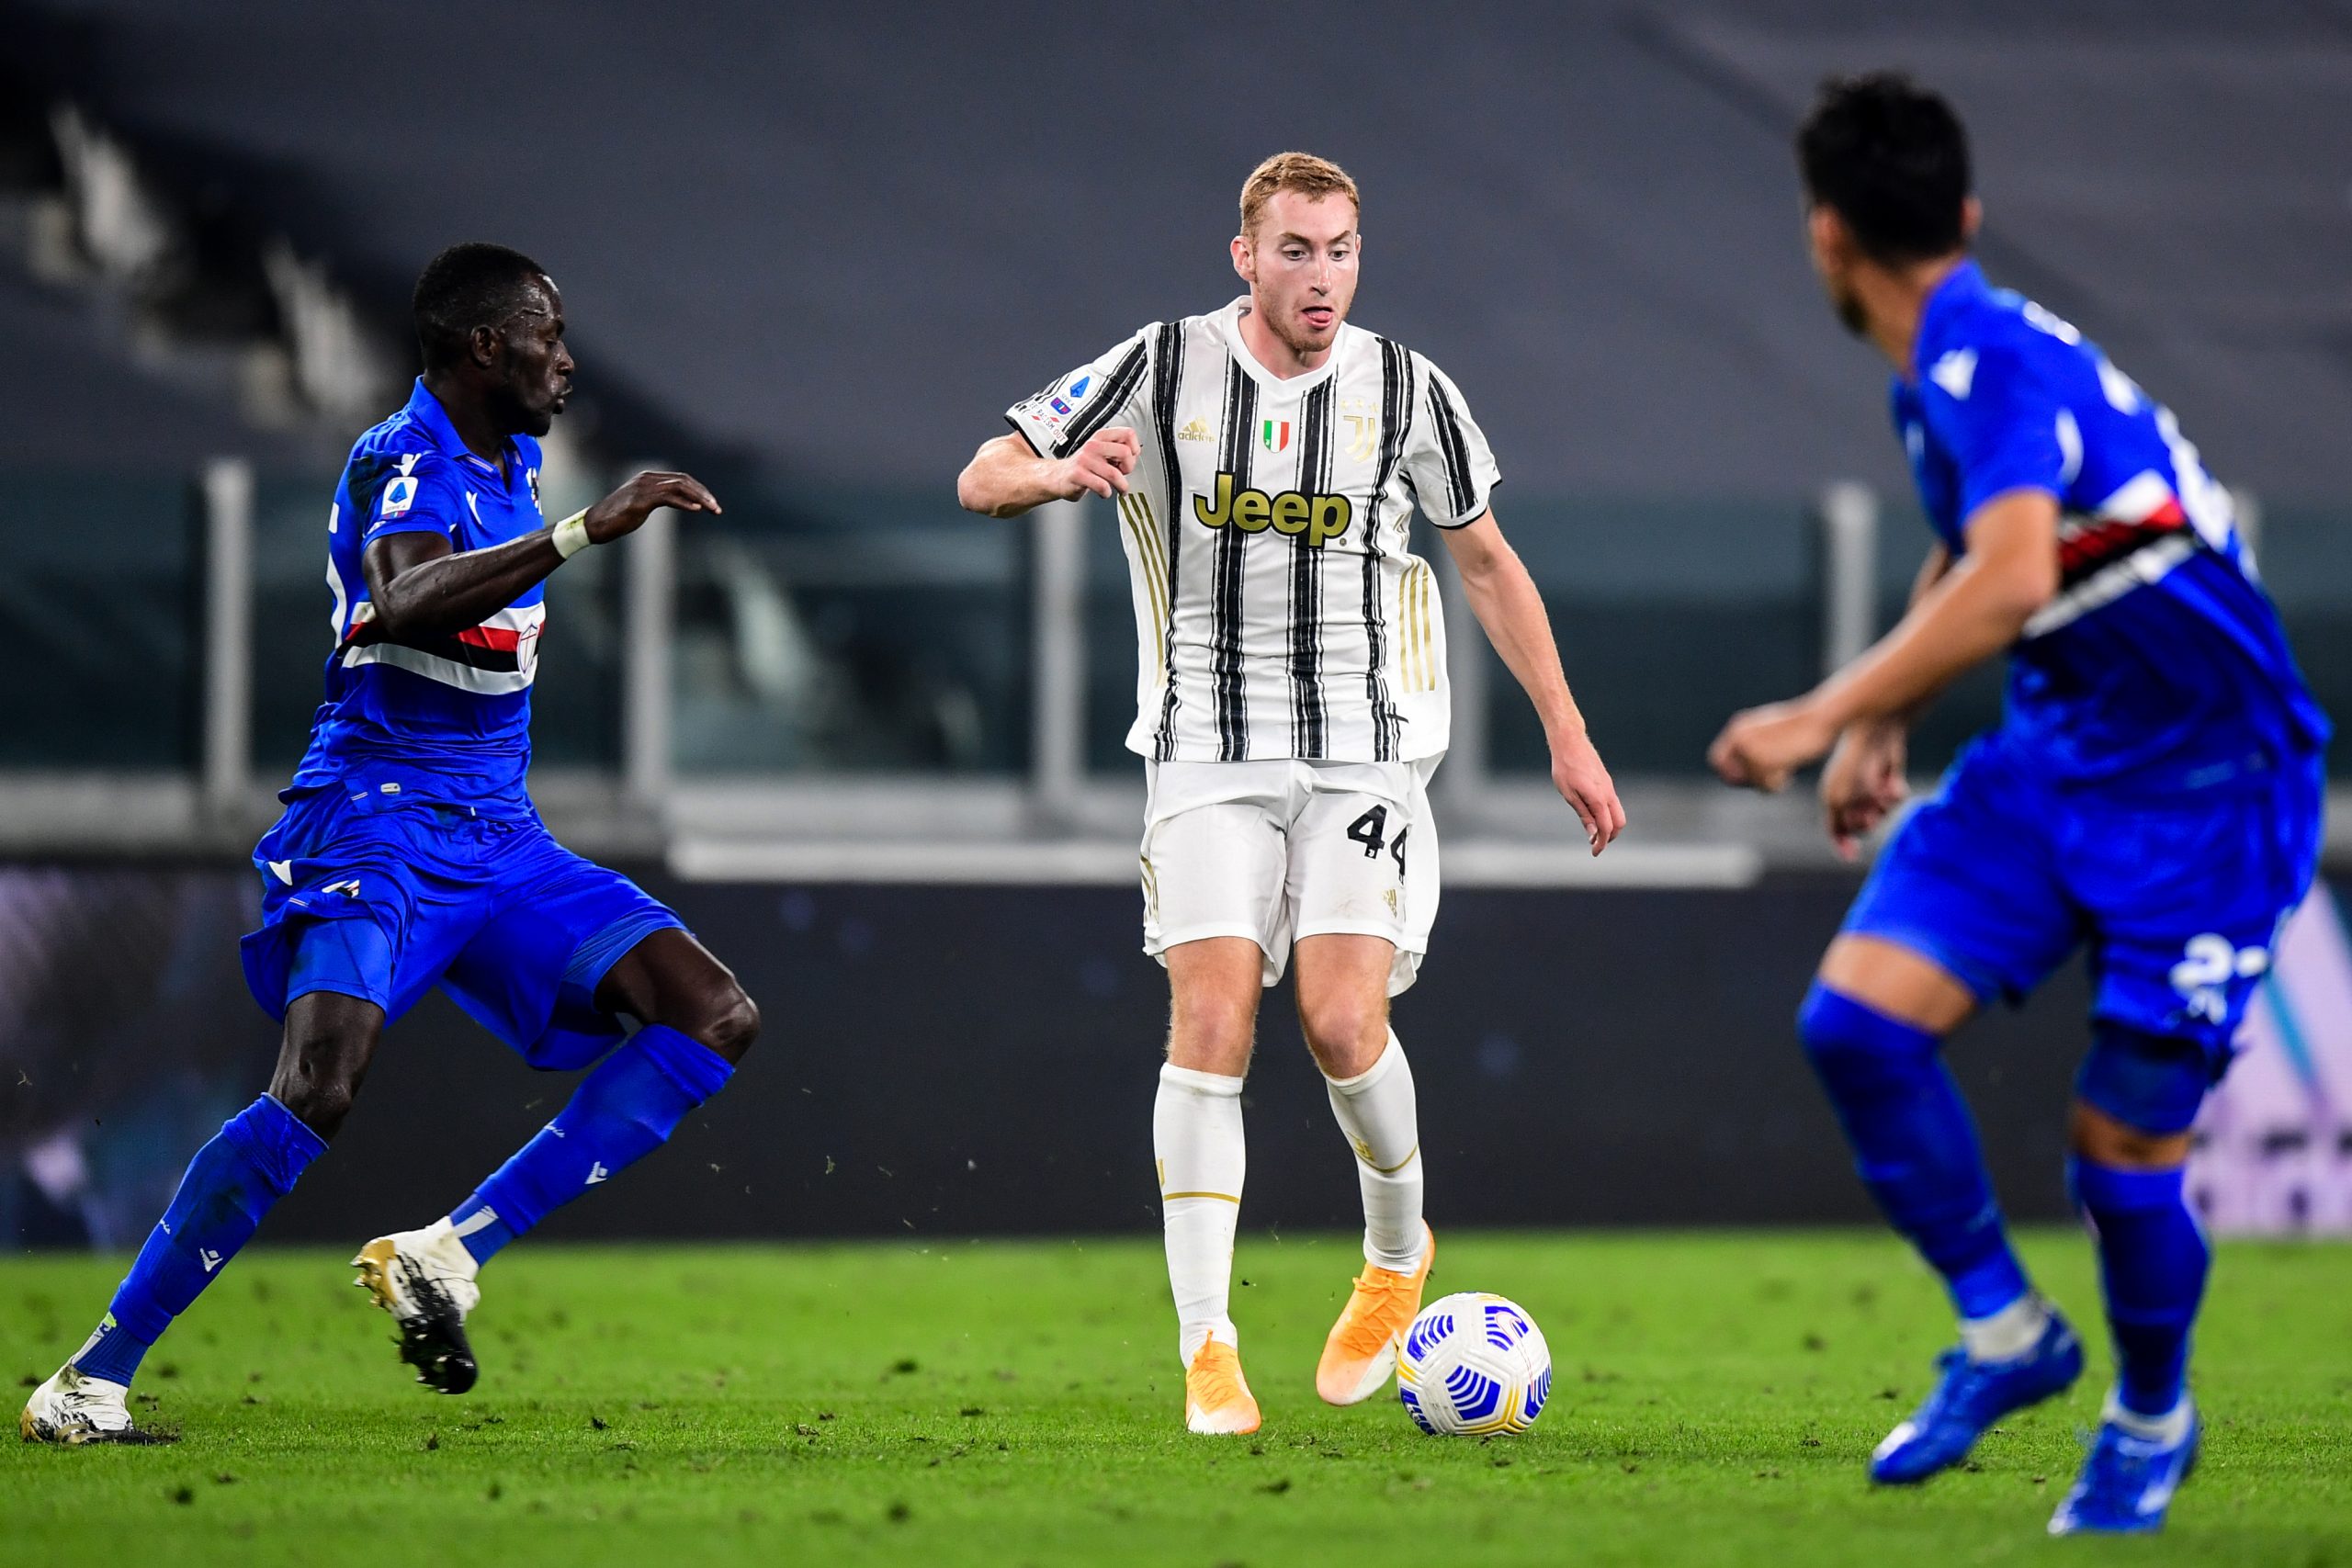 It took only 13 minutes for Dejan Kulusevski to score his first Juventus goal as the Swede wrapped the Bianconeri's opener in Sunday night's win over Sampdoria